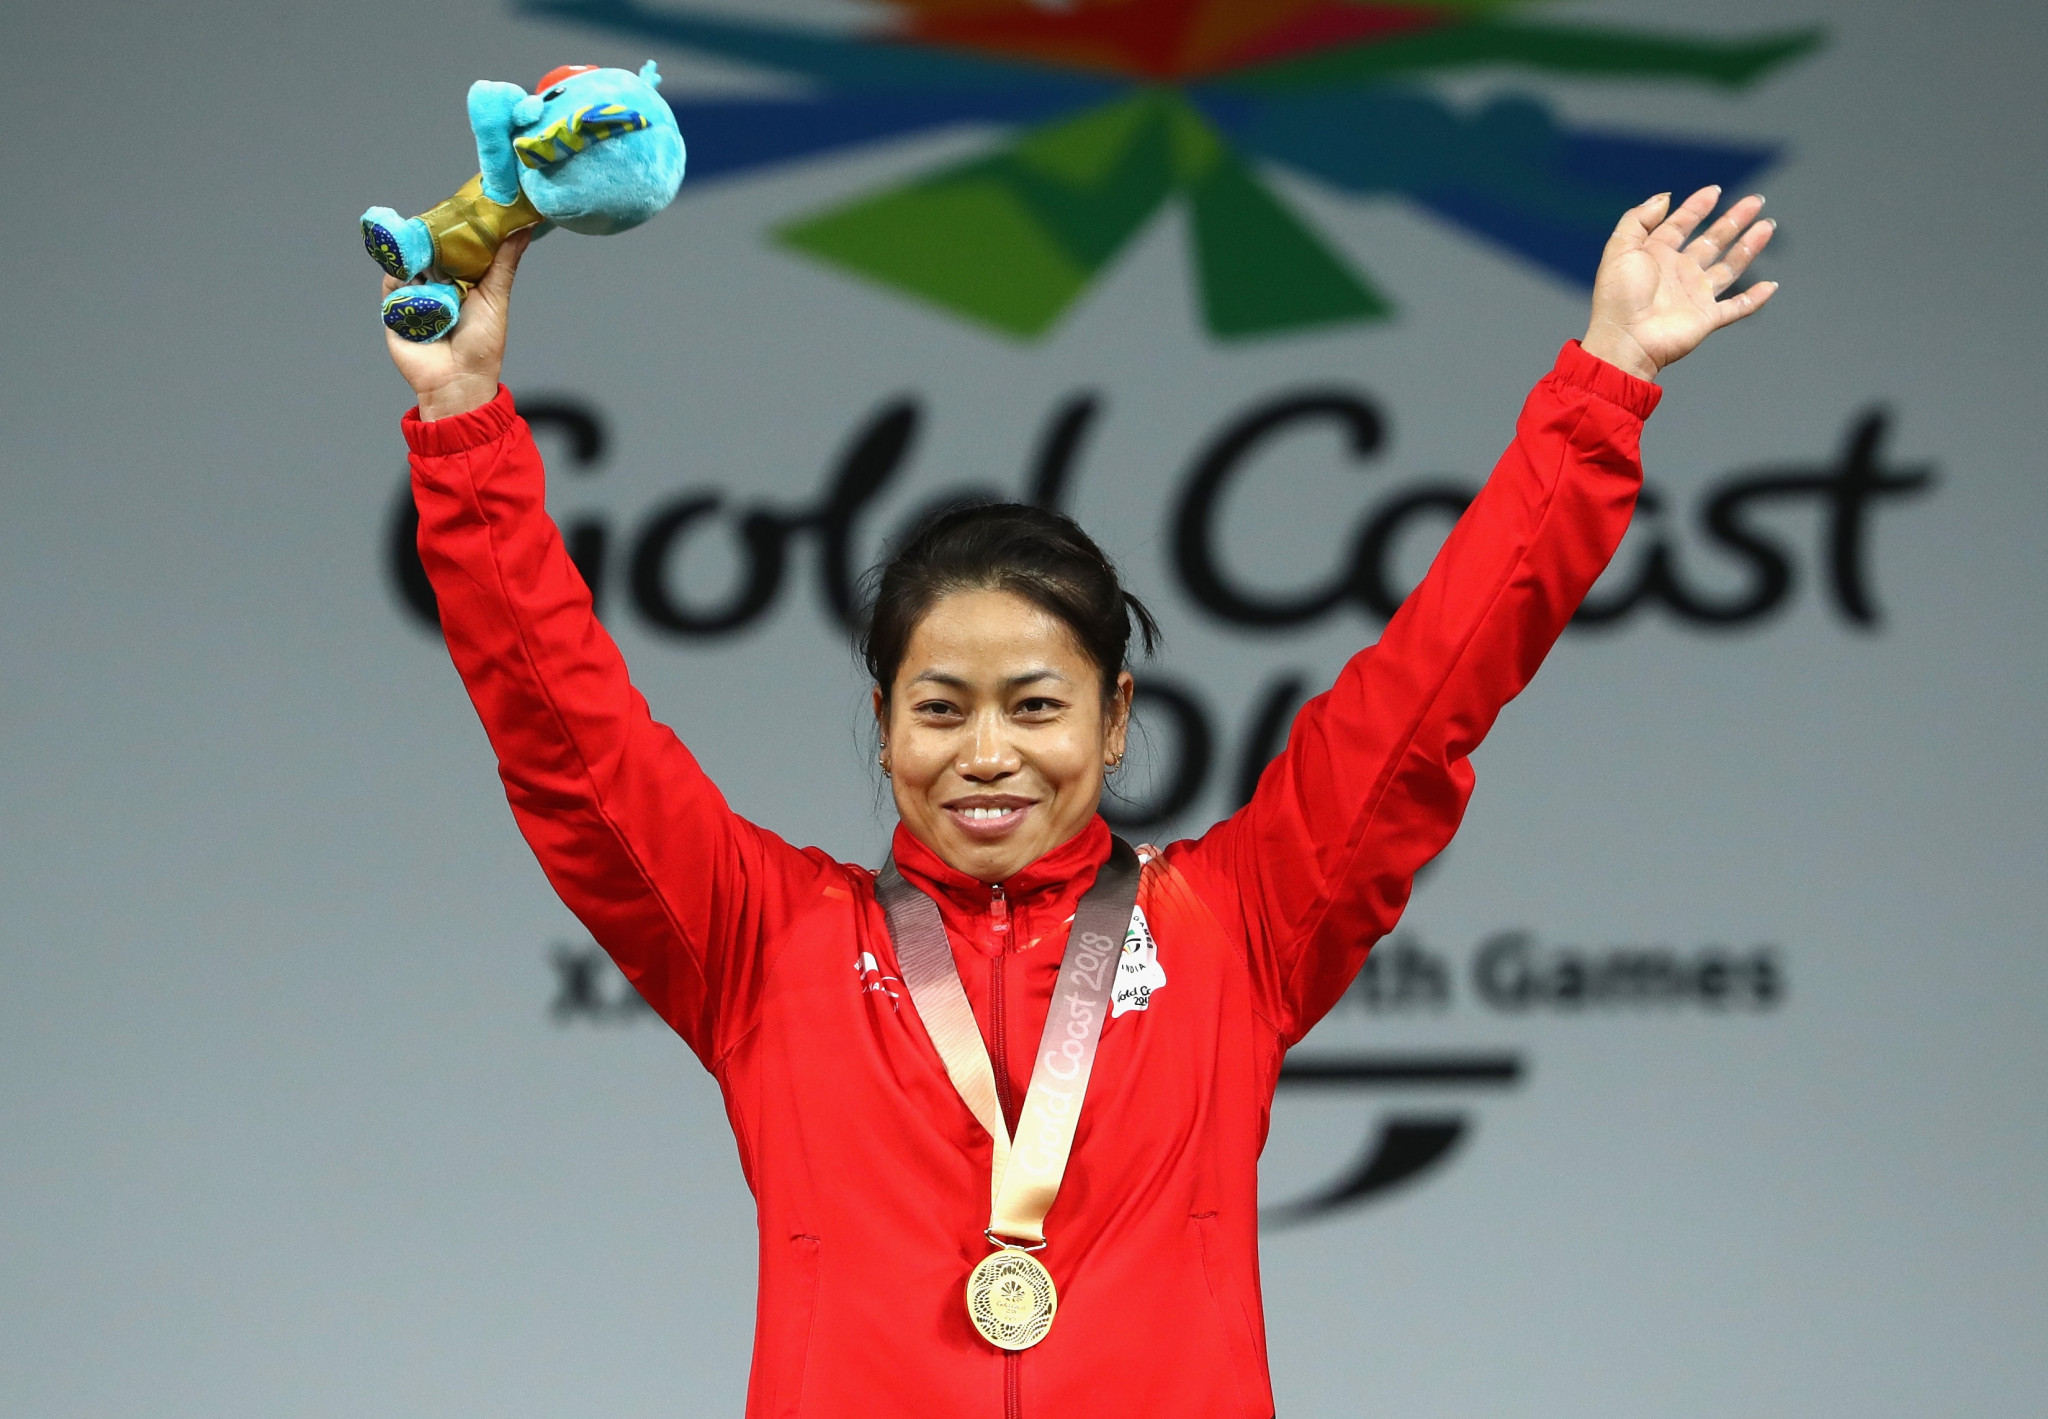 Khumukcham Sanjita Chanu was previously banned by the International Weightlifting Federation in 2018 before the charges were dropped two years later ©Getty Images